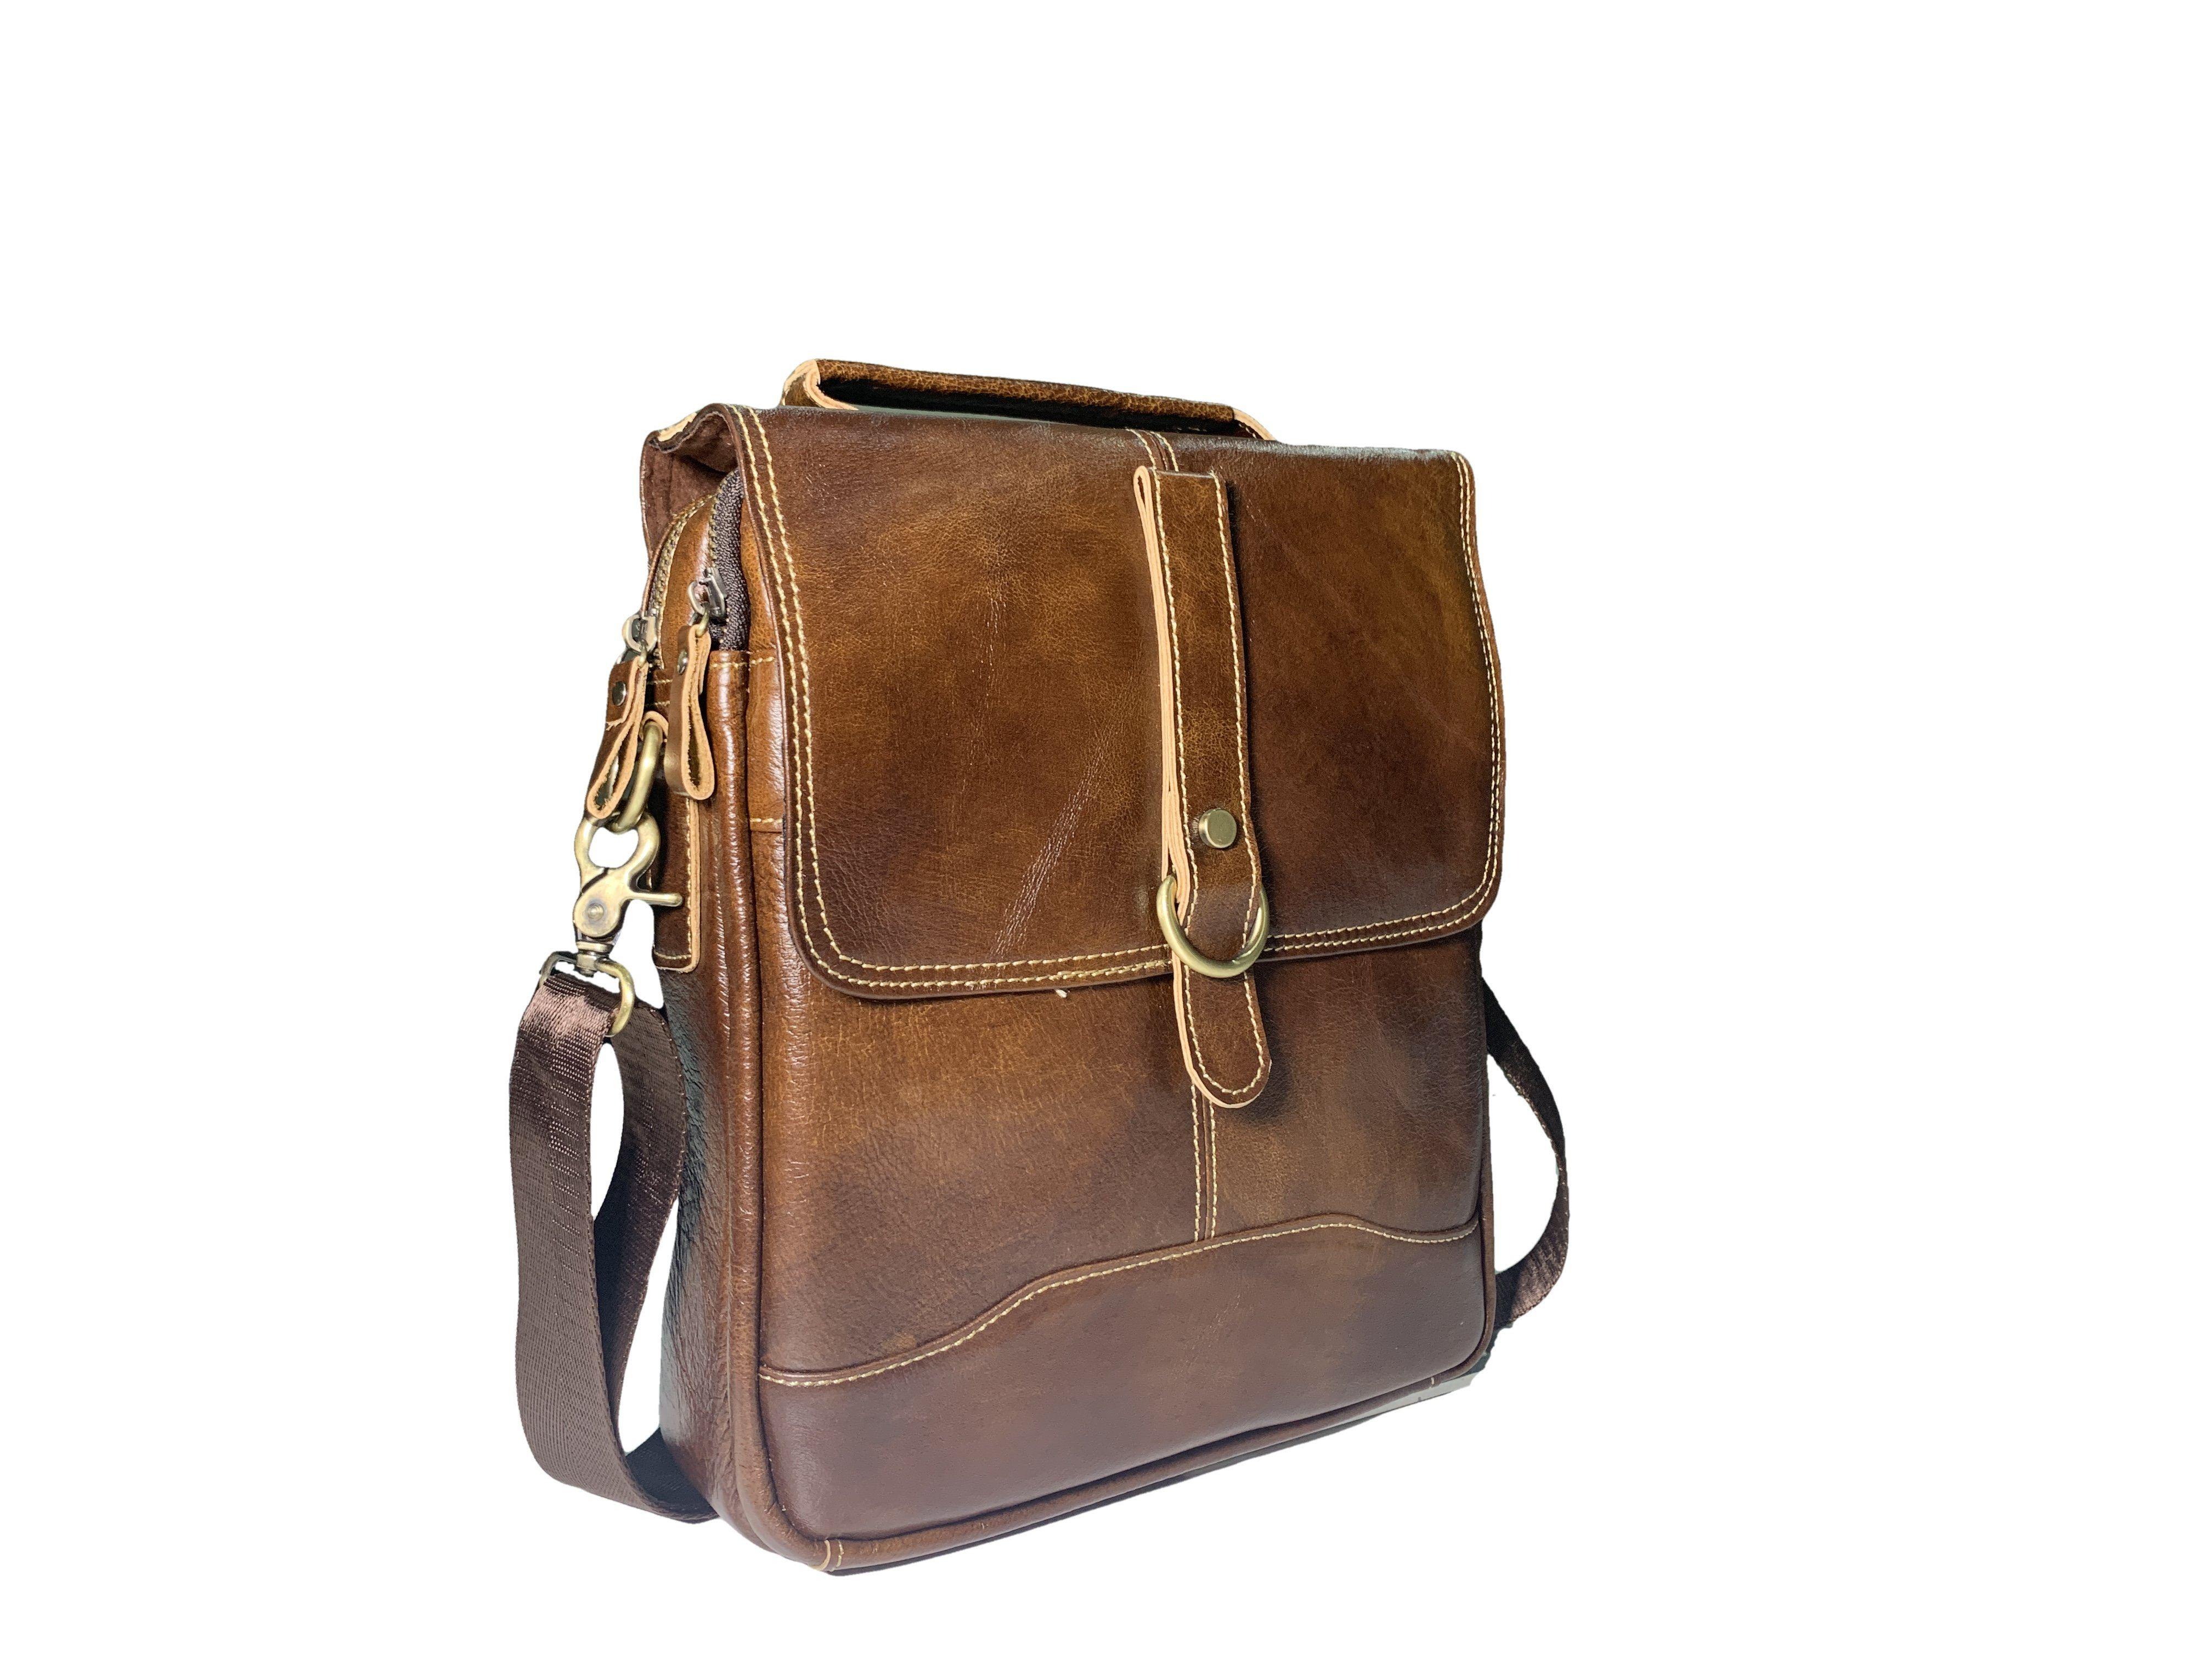 Discovery X Messenger Brown Leather Travel Bag | Ejad